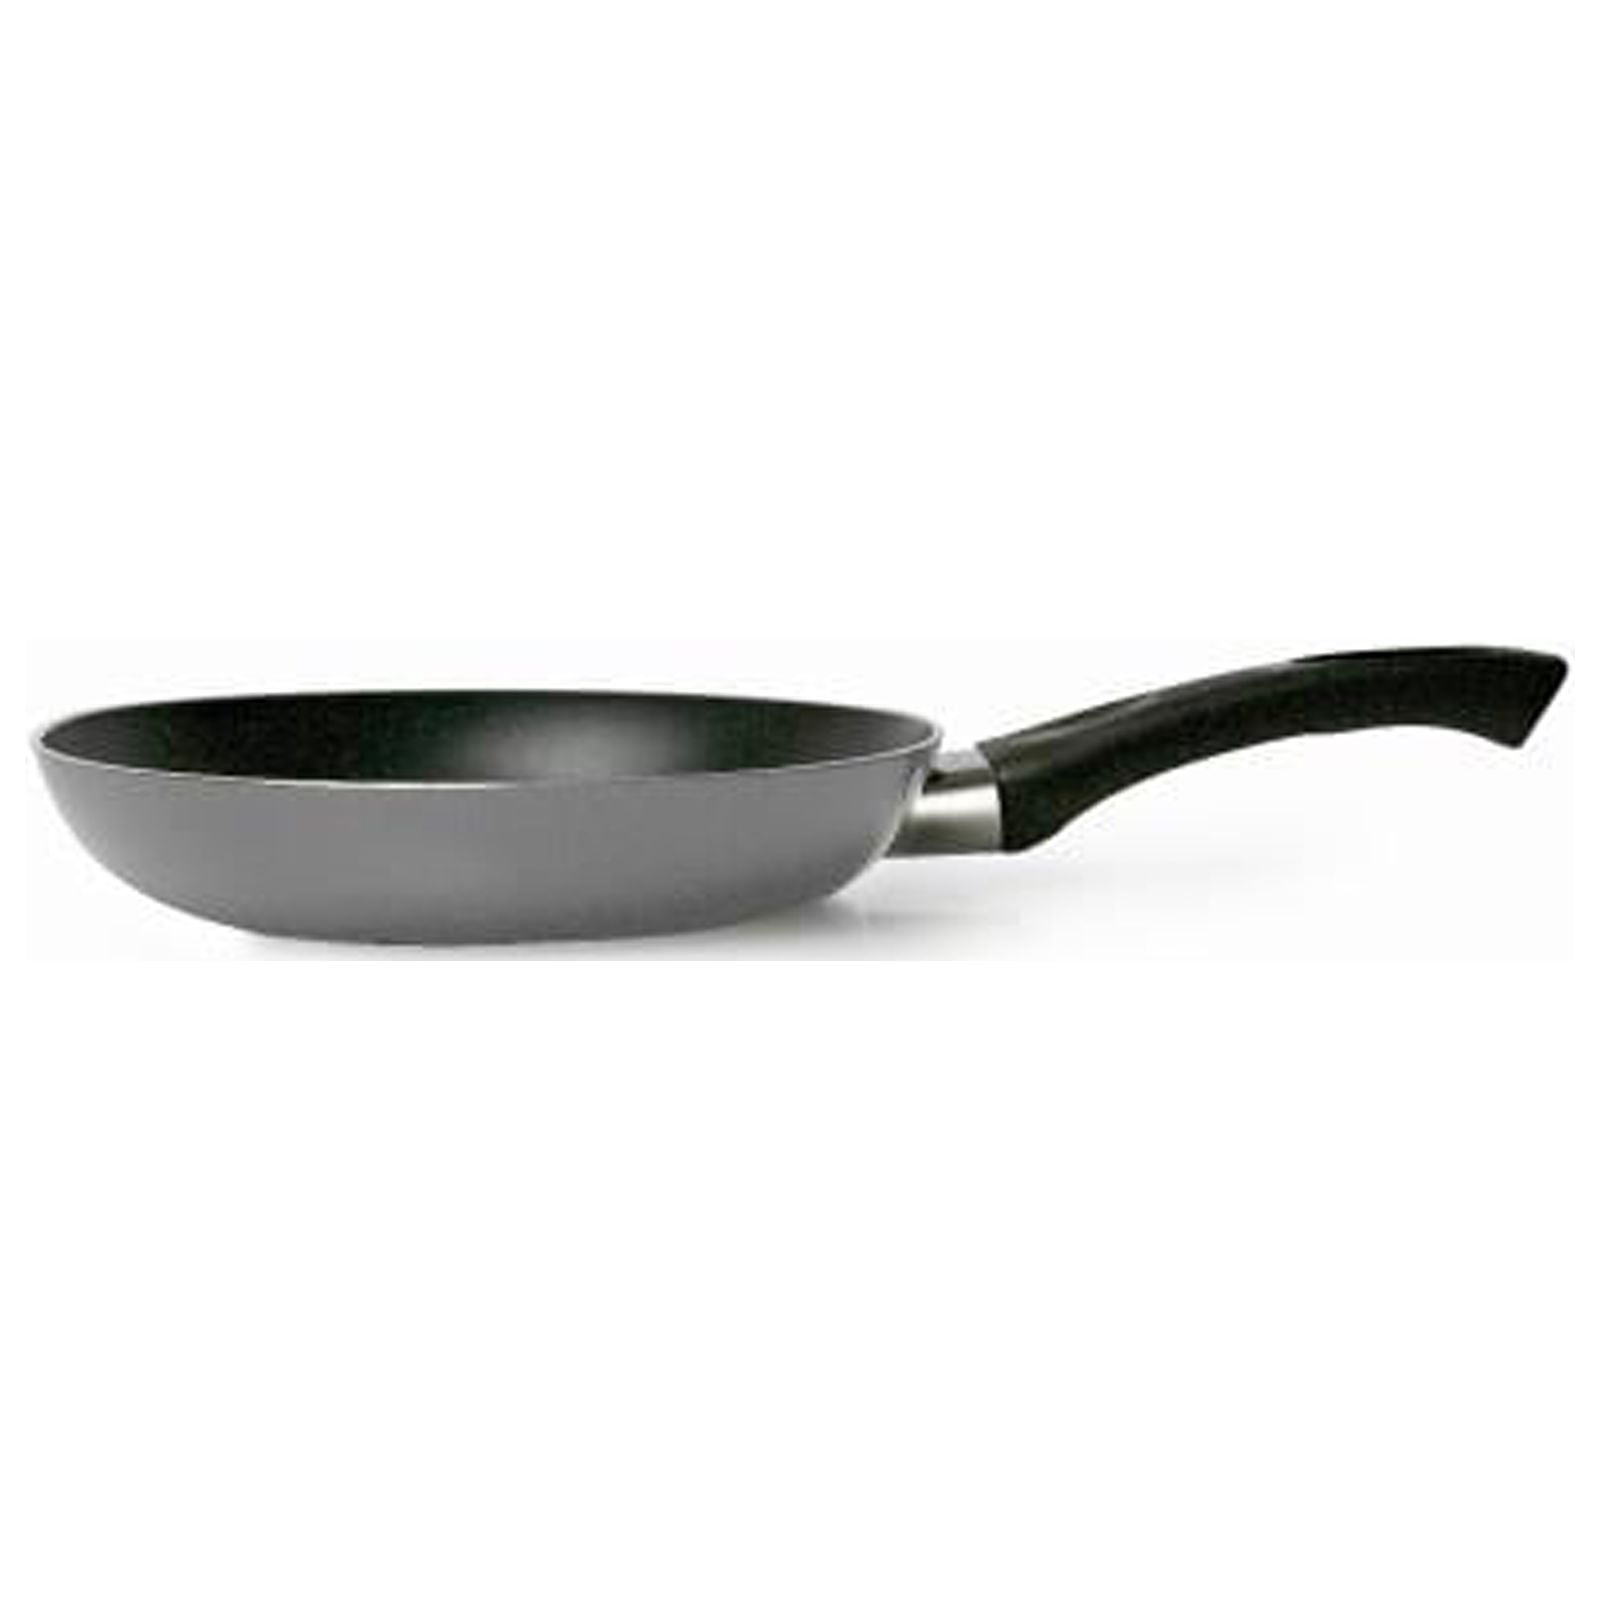 Ecolution Elements Non-Stick 11” Fry Pan and 2Qt. Saucepan (Green) - New